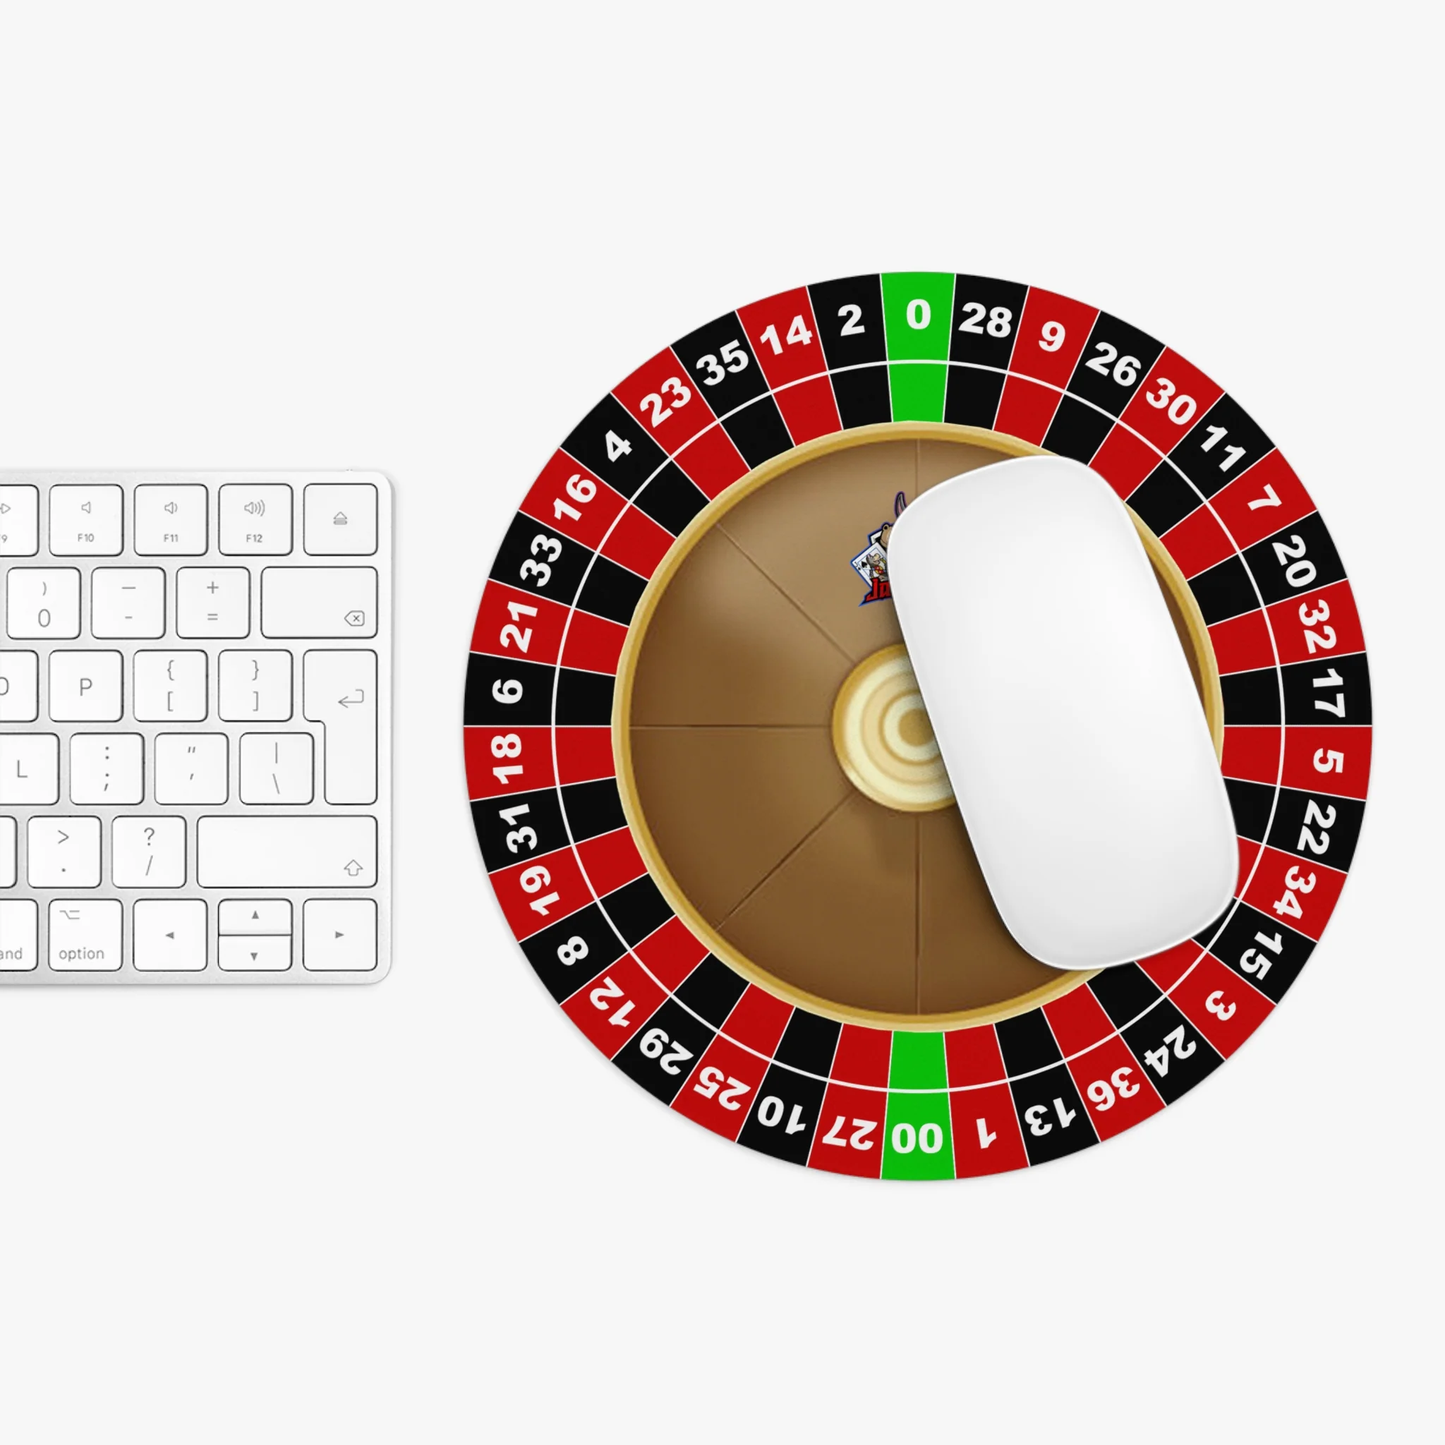 Double Zero Roulette Wheel - Mouse Pad (8") - FREE SHIPPING